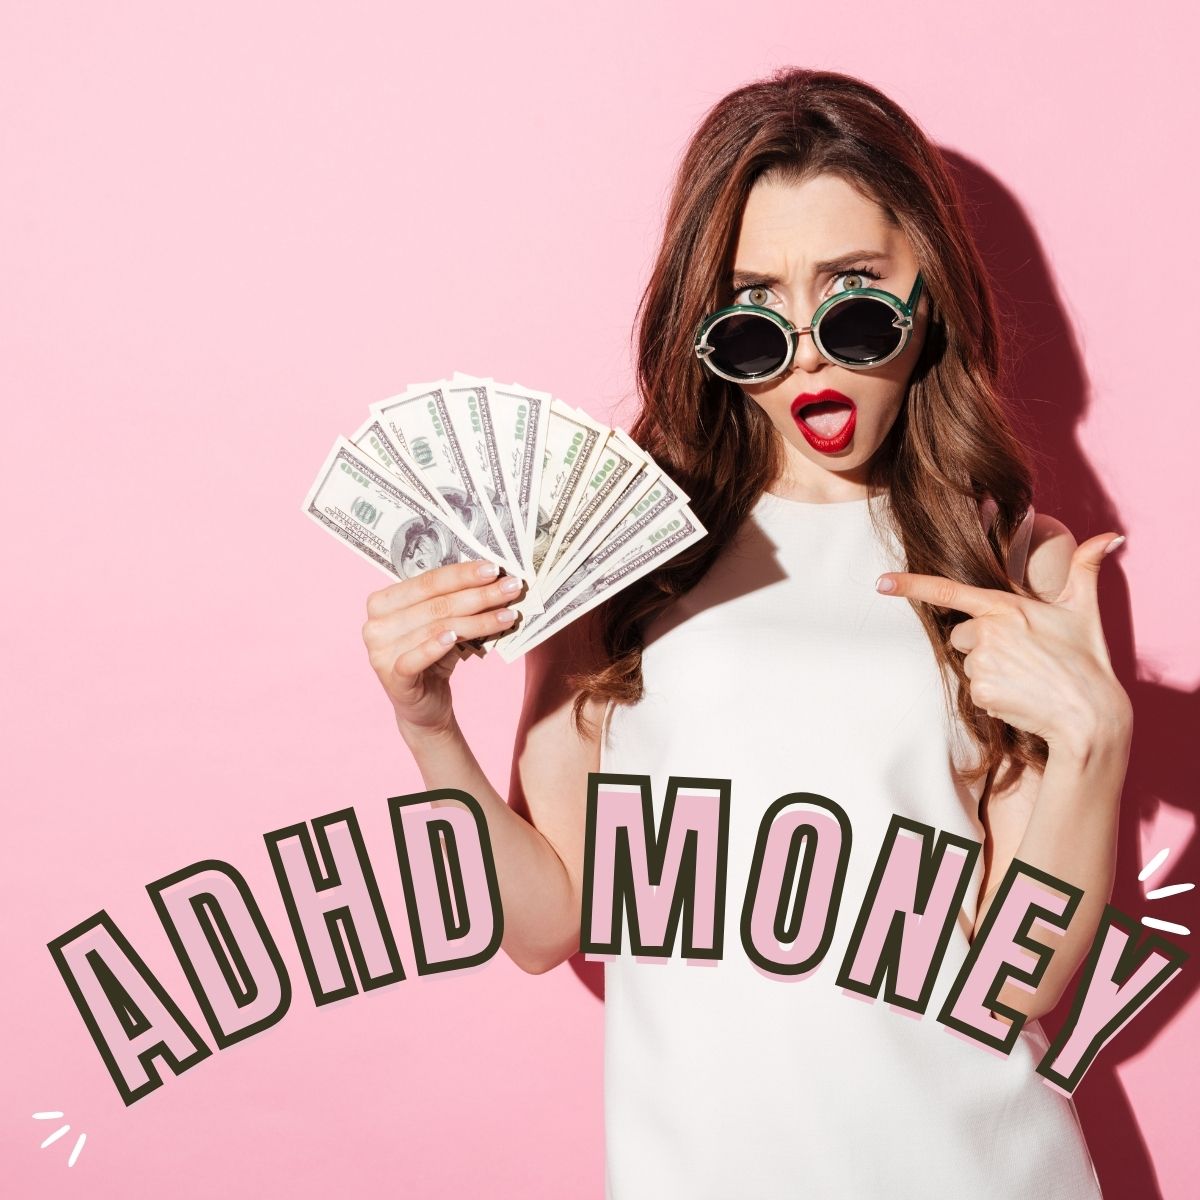 Woman with adhd holding money